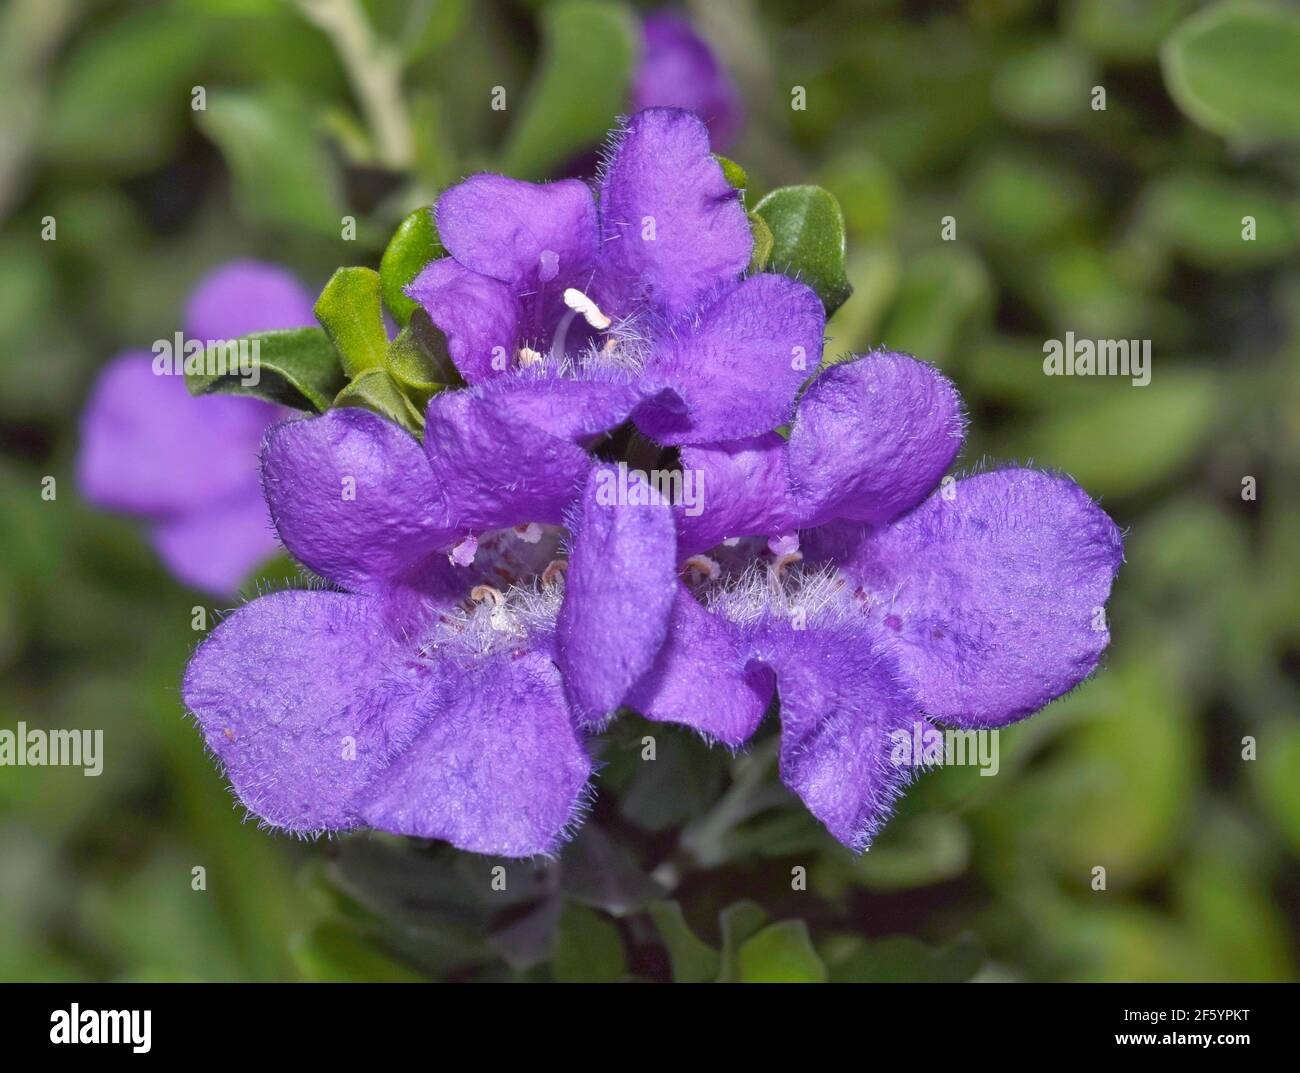 Barometer Bush flowers (Leucophyllum) in a garden in Houston, TX during Springtime with selective focus. Said to have the ability to forecast rain. Stock Photo